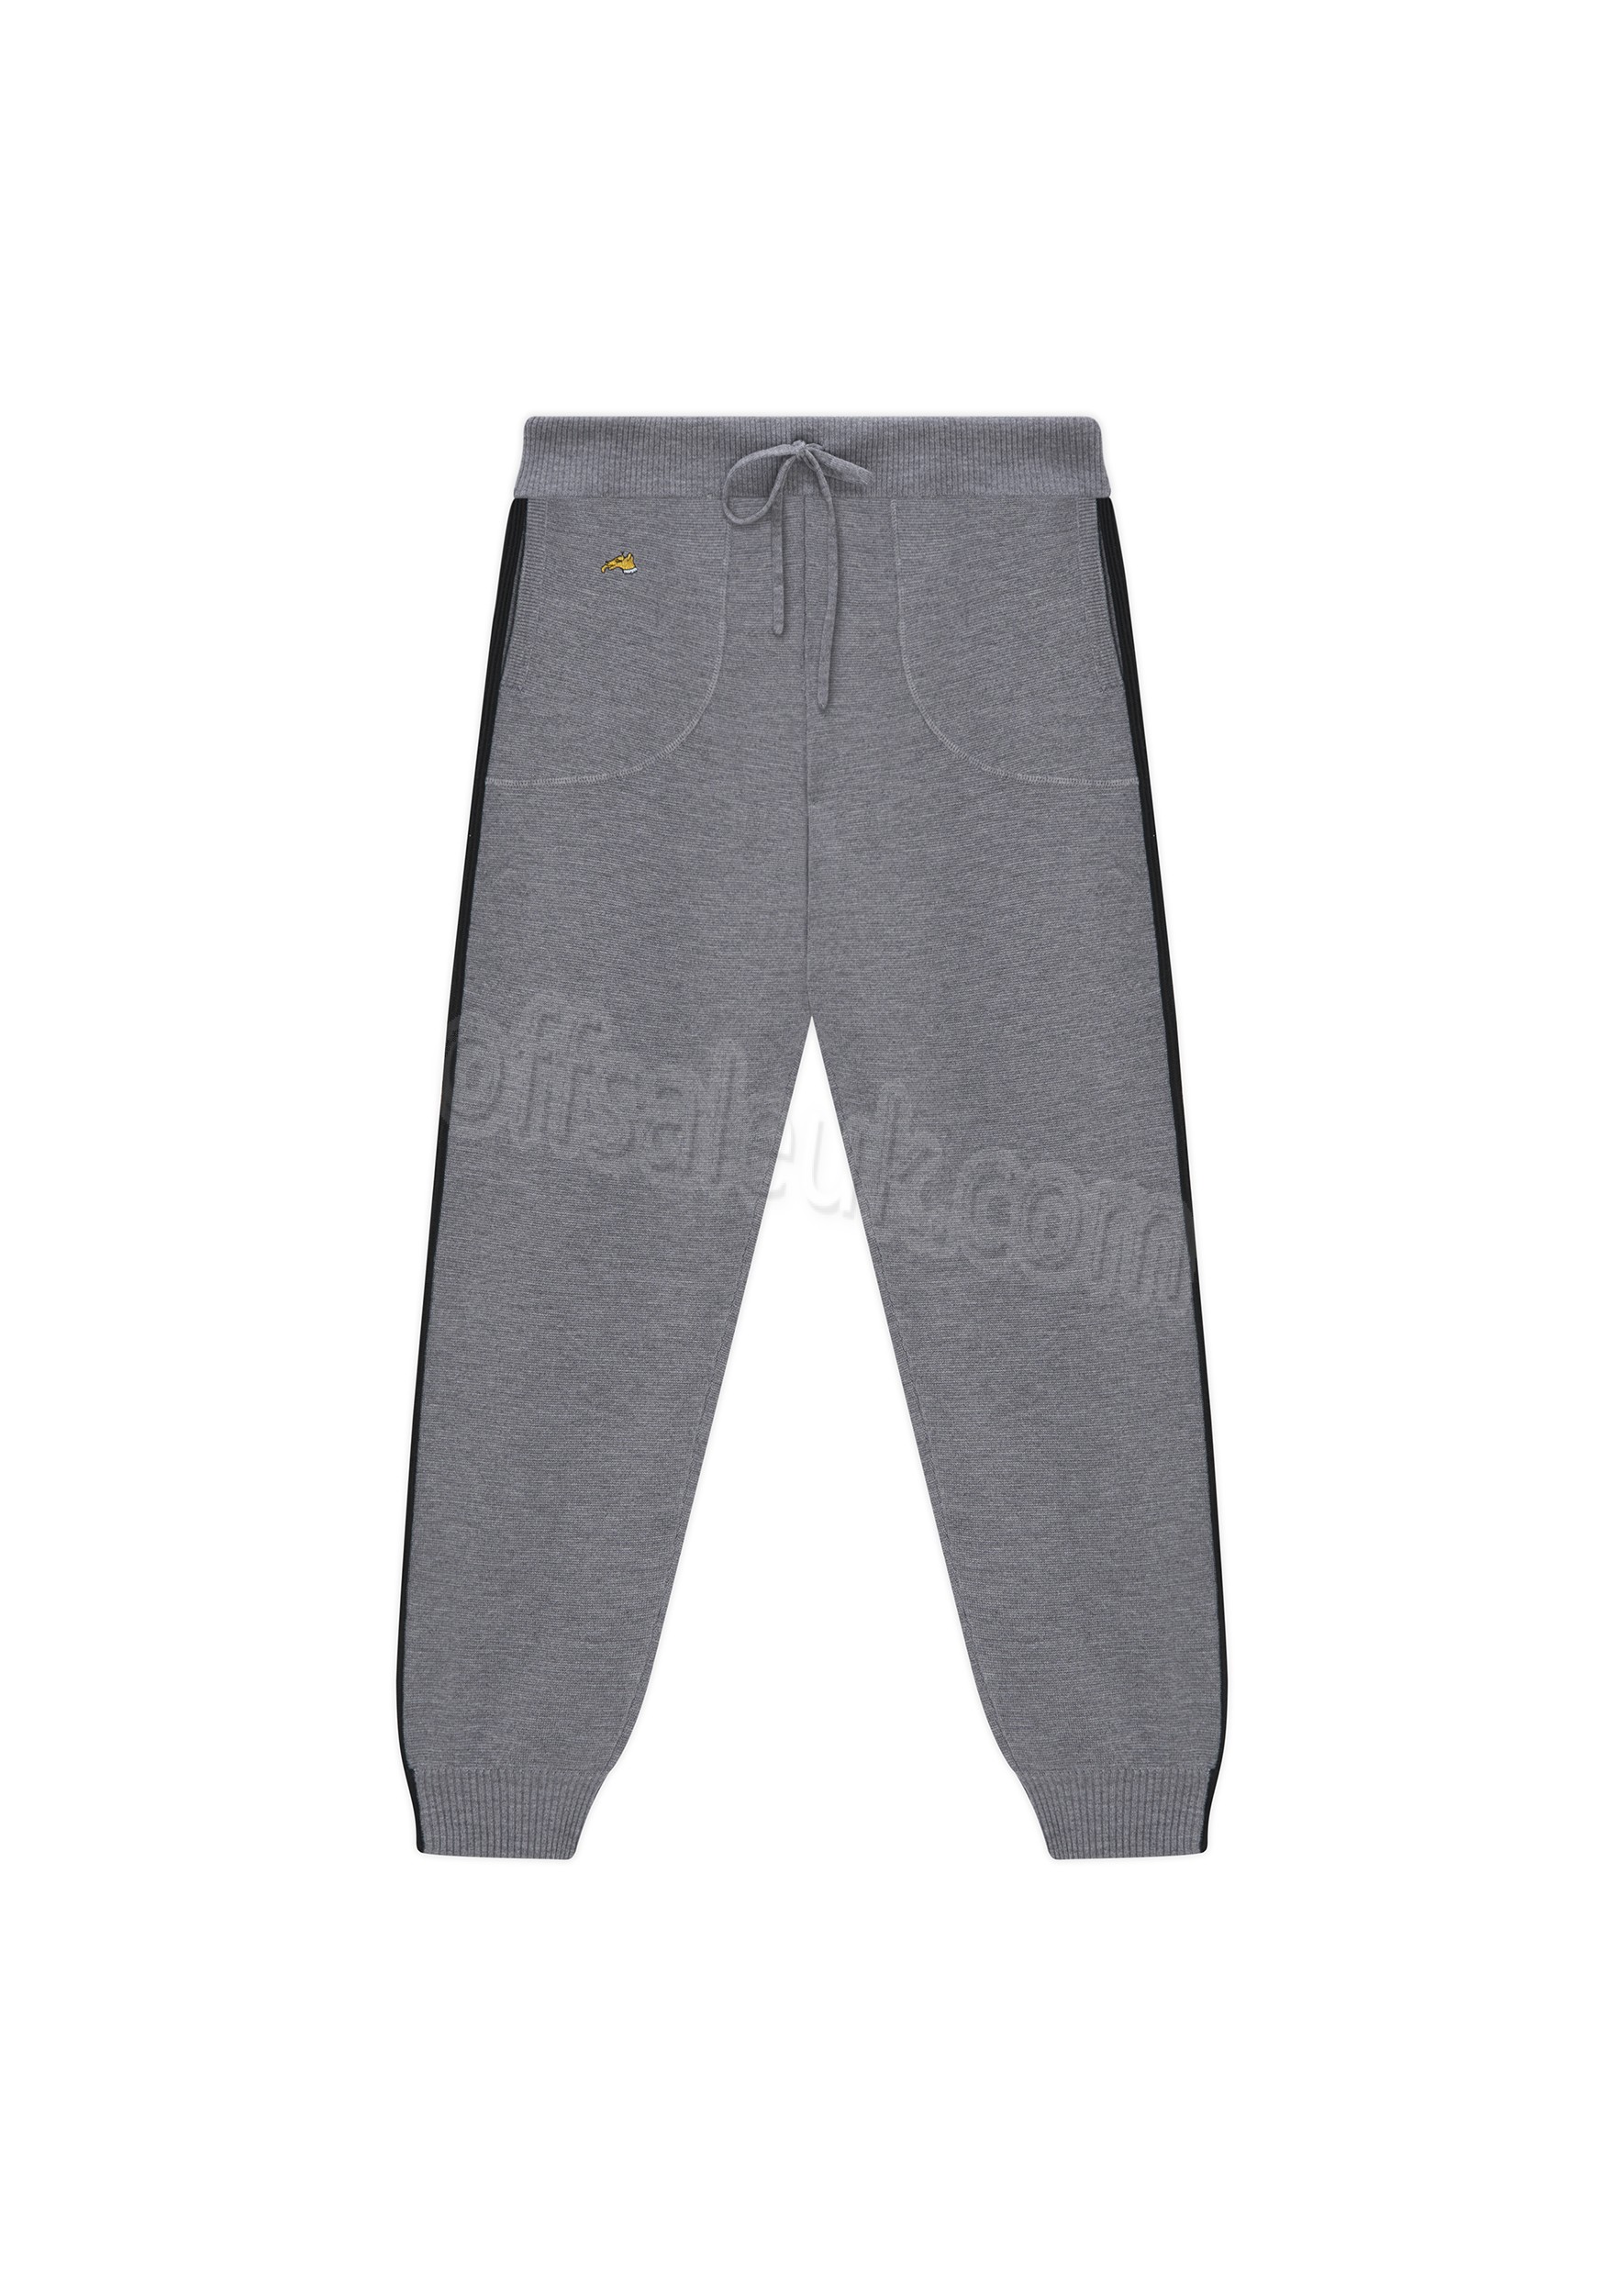 Cheap Mens Knitted Track Pant - Cheap Mens Knitted Track Pant